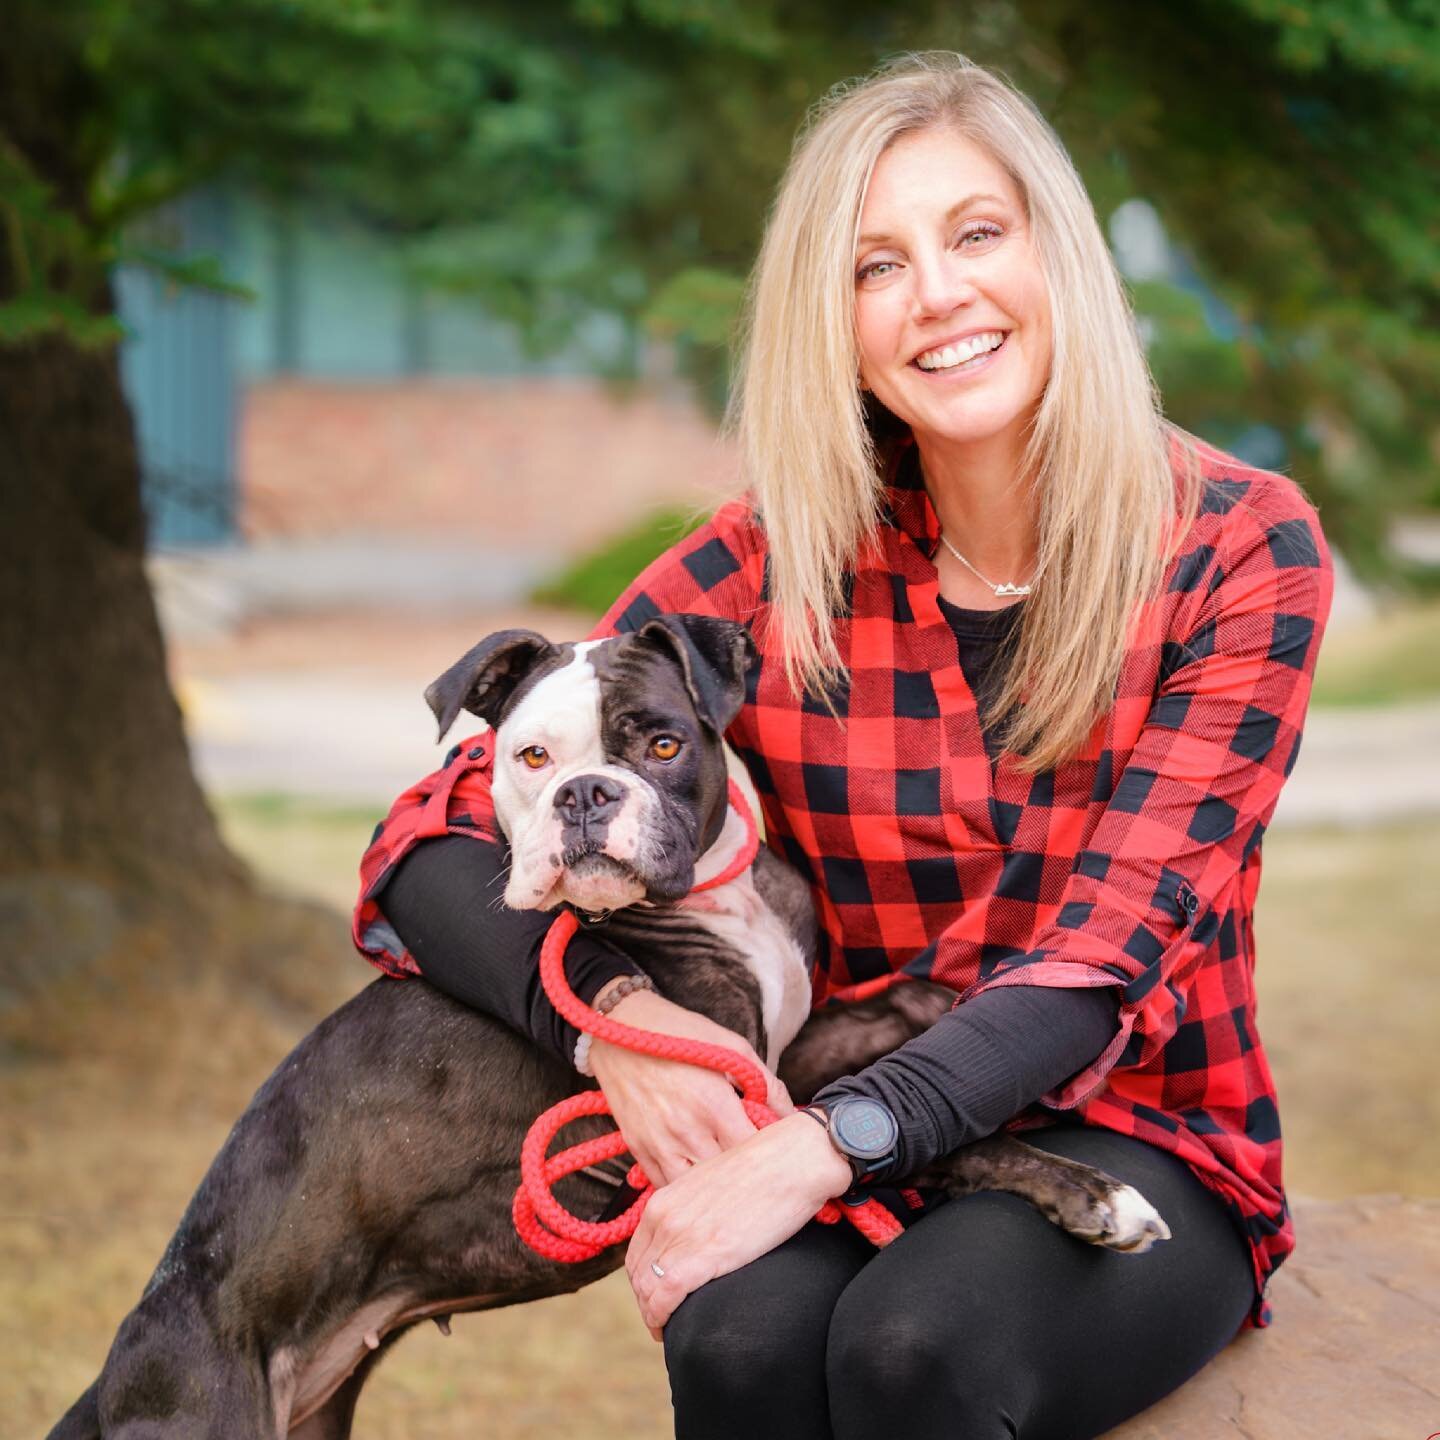 Covid really put a damper on photography this past year so I jumped at the opportunity to do this photo session for @deanna_runs, Executive Director at @aarcs, and boxer pup Ila. Watch for Ila in the coming weeks on #AARCS Adoptable Dogs web page. Th